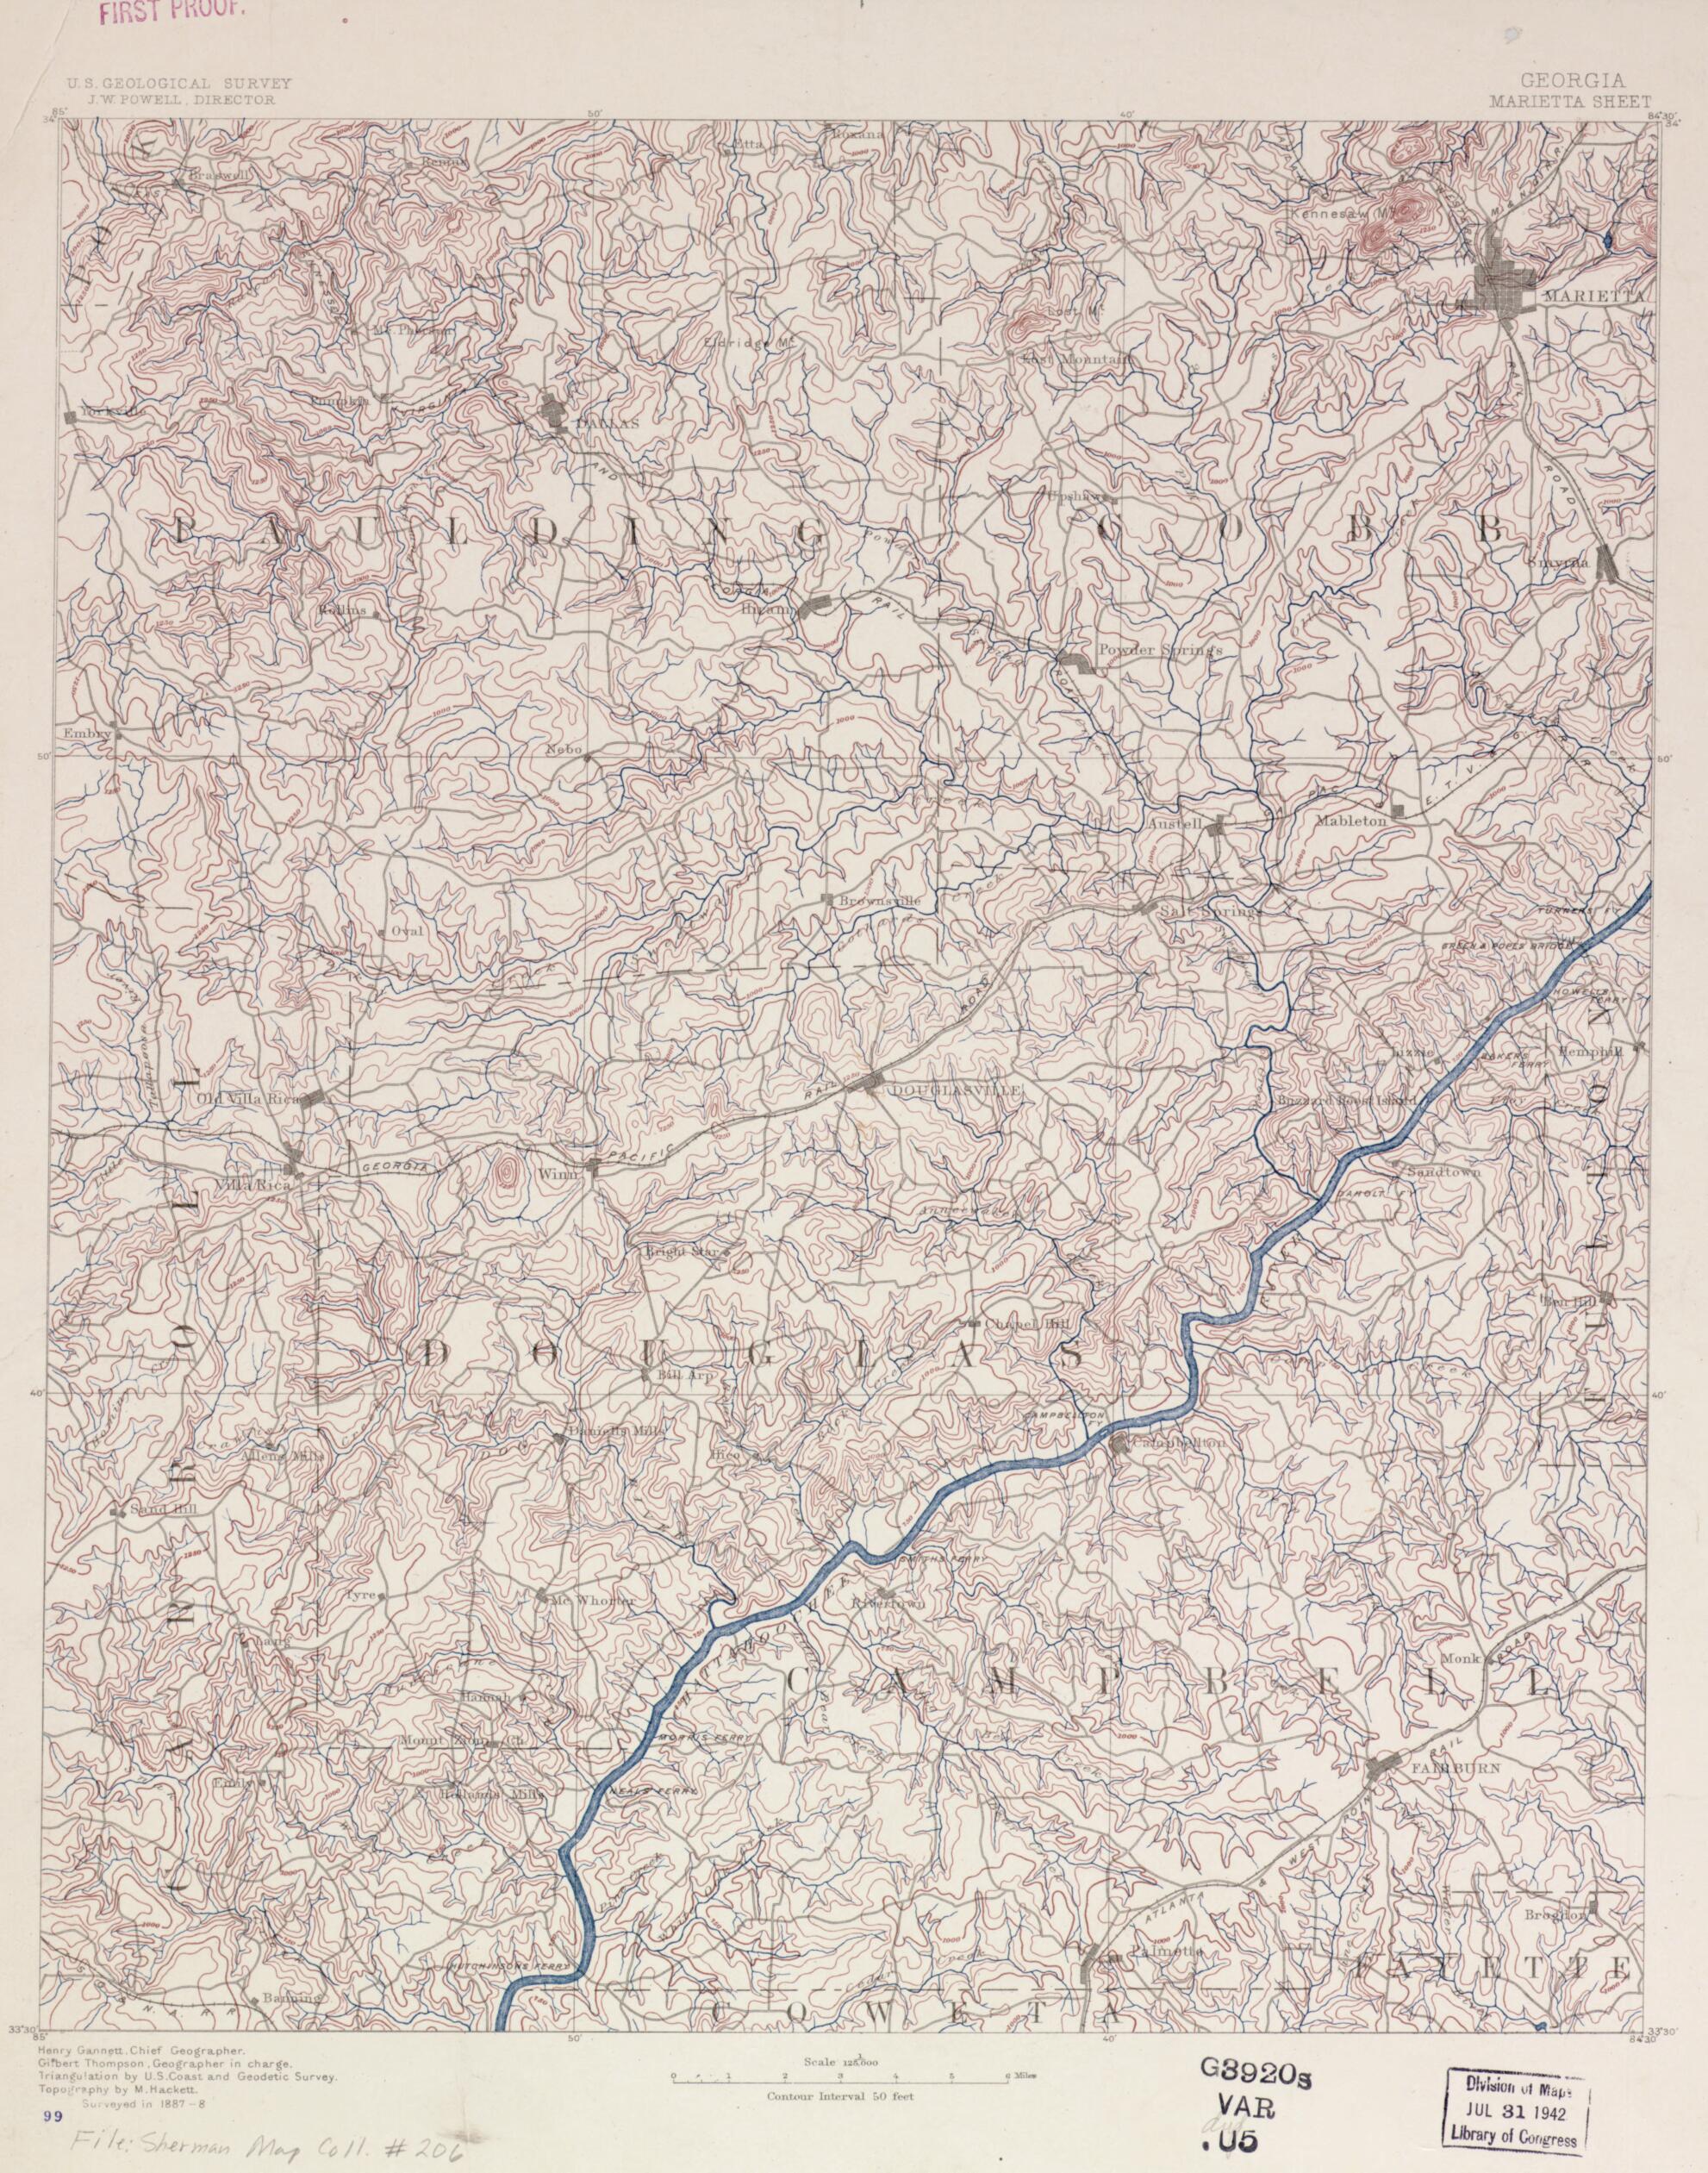 This old map of Georgia, Marietta Sheet from 1888 was created by Henry Gannett,  Geological Survey (U.S.), M. Hackett, Gilbert Thompson,  U.S. Coast and Geodetic Survey in 1888